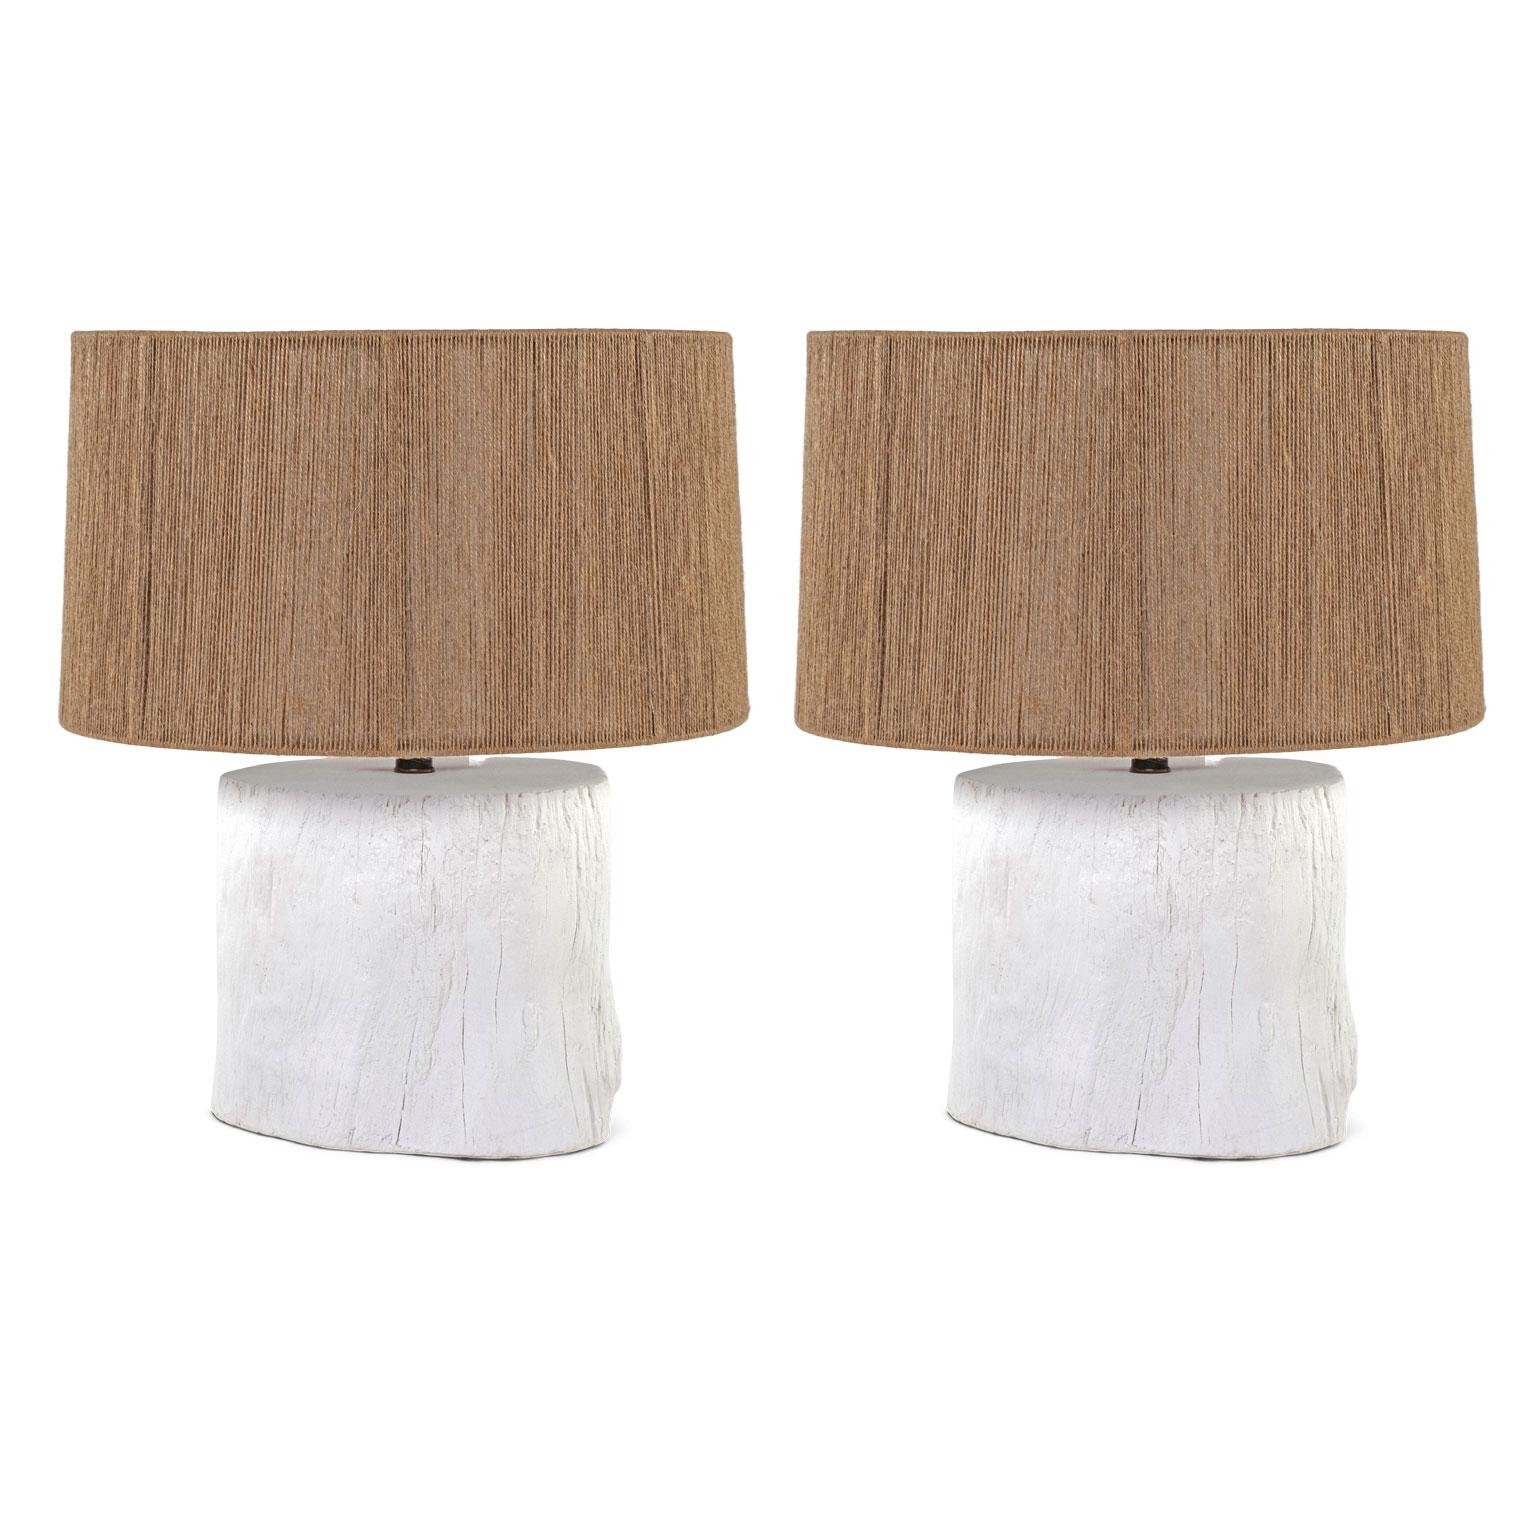 Faux bois 'Tree Stump' white plaster lamp, by Liz Marsh. Faux bois style artist-made white plaster lamp, wired for use within the USA using UL approved parts. Accommodates medium-size bulb. Sold without shade (listed measurements do not include